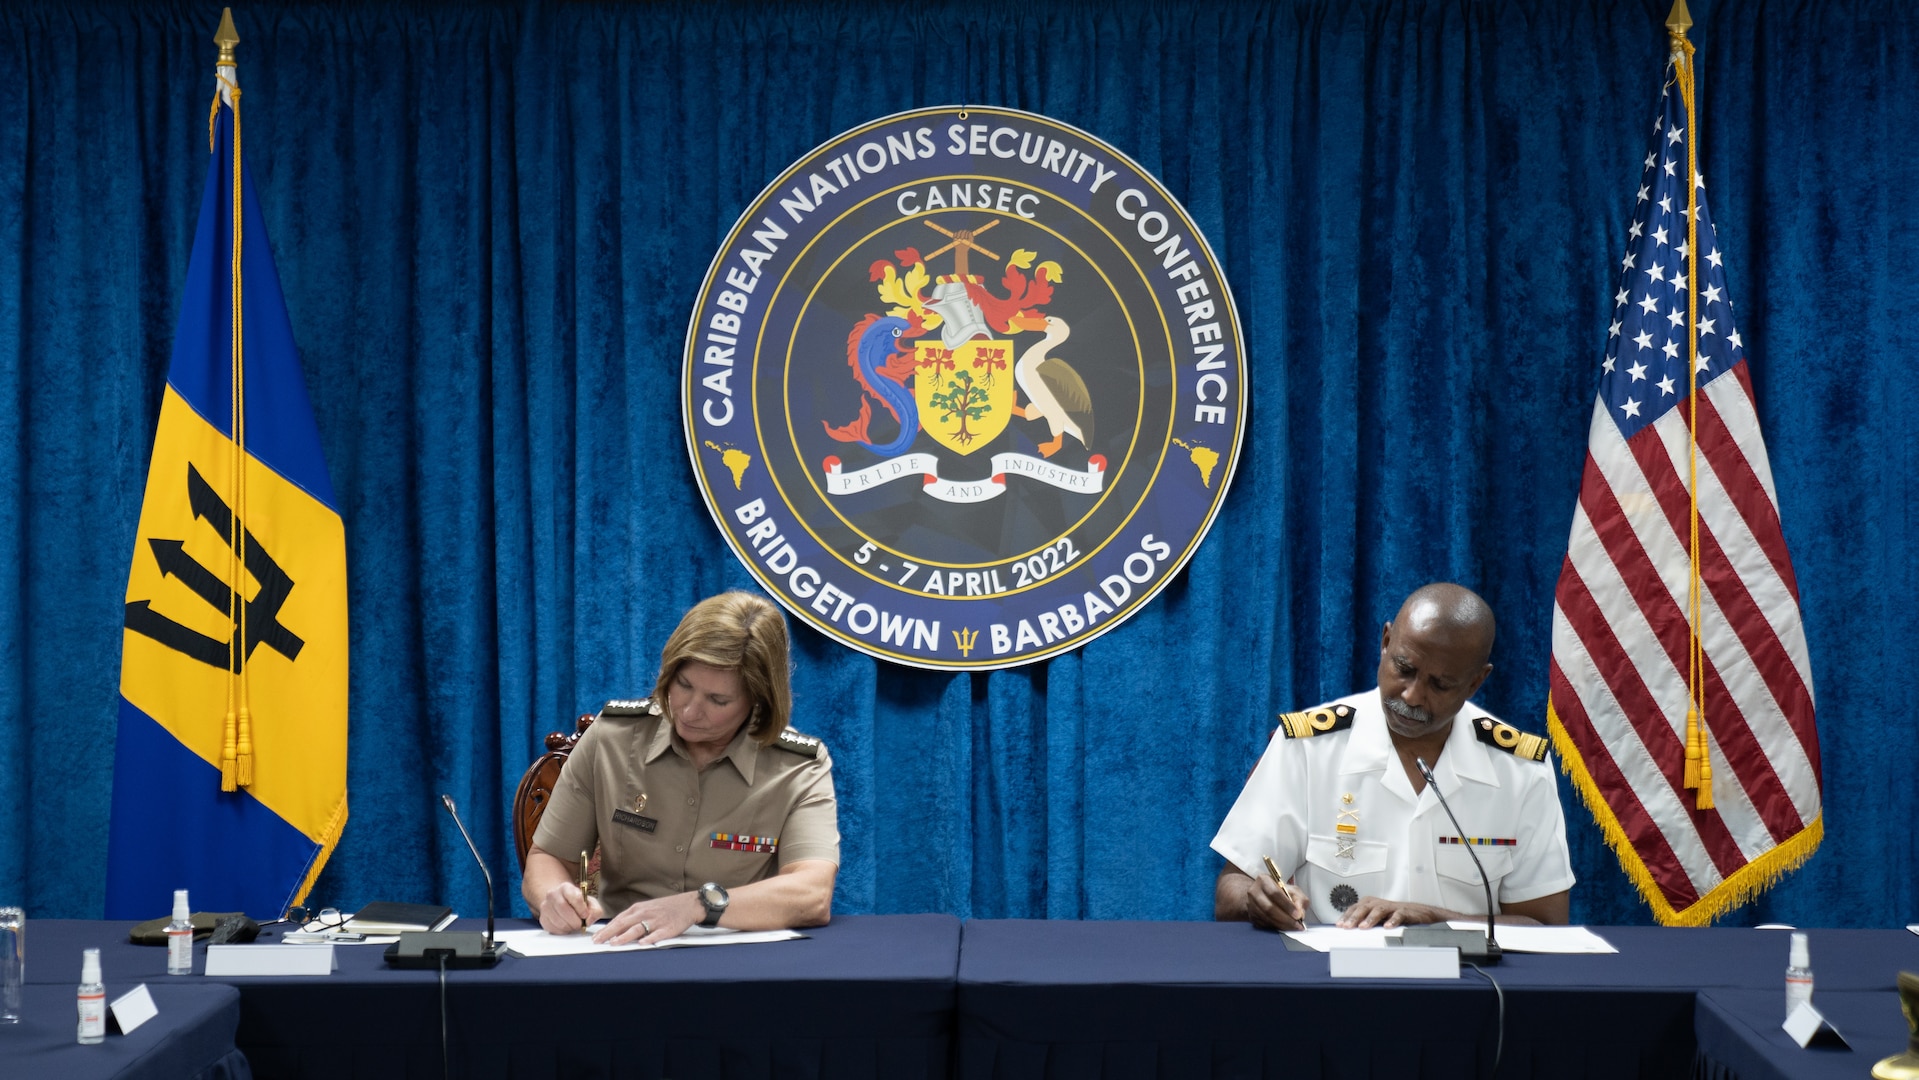 Army Gen. Laura J. Richardson, U.S. Southern Command commander, and Barbados Defence Force Chief of Staff, Commodore Errington Shurland, sign an Engagement and Cooperation Framework.